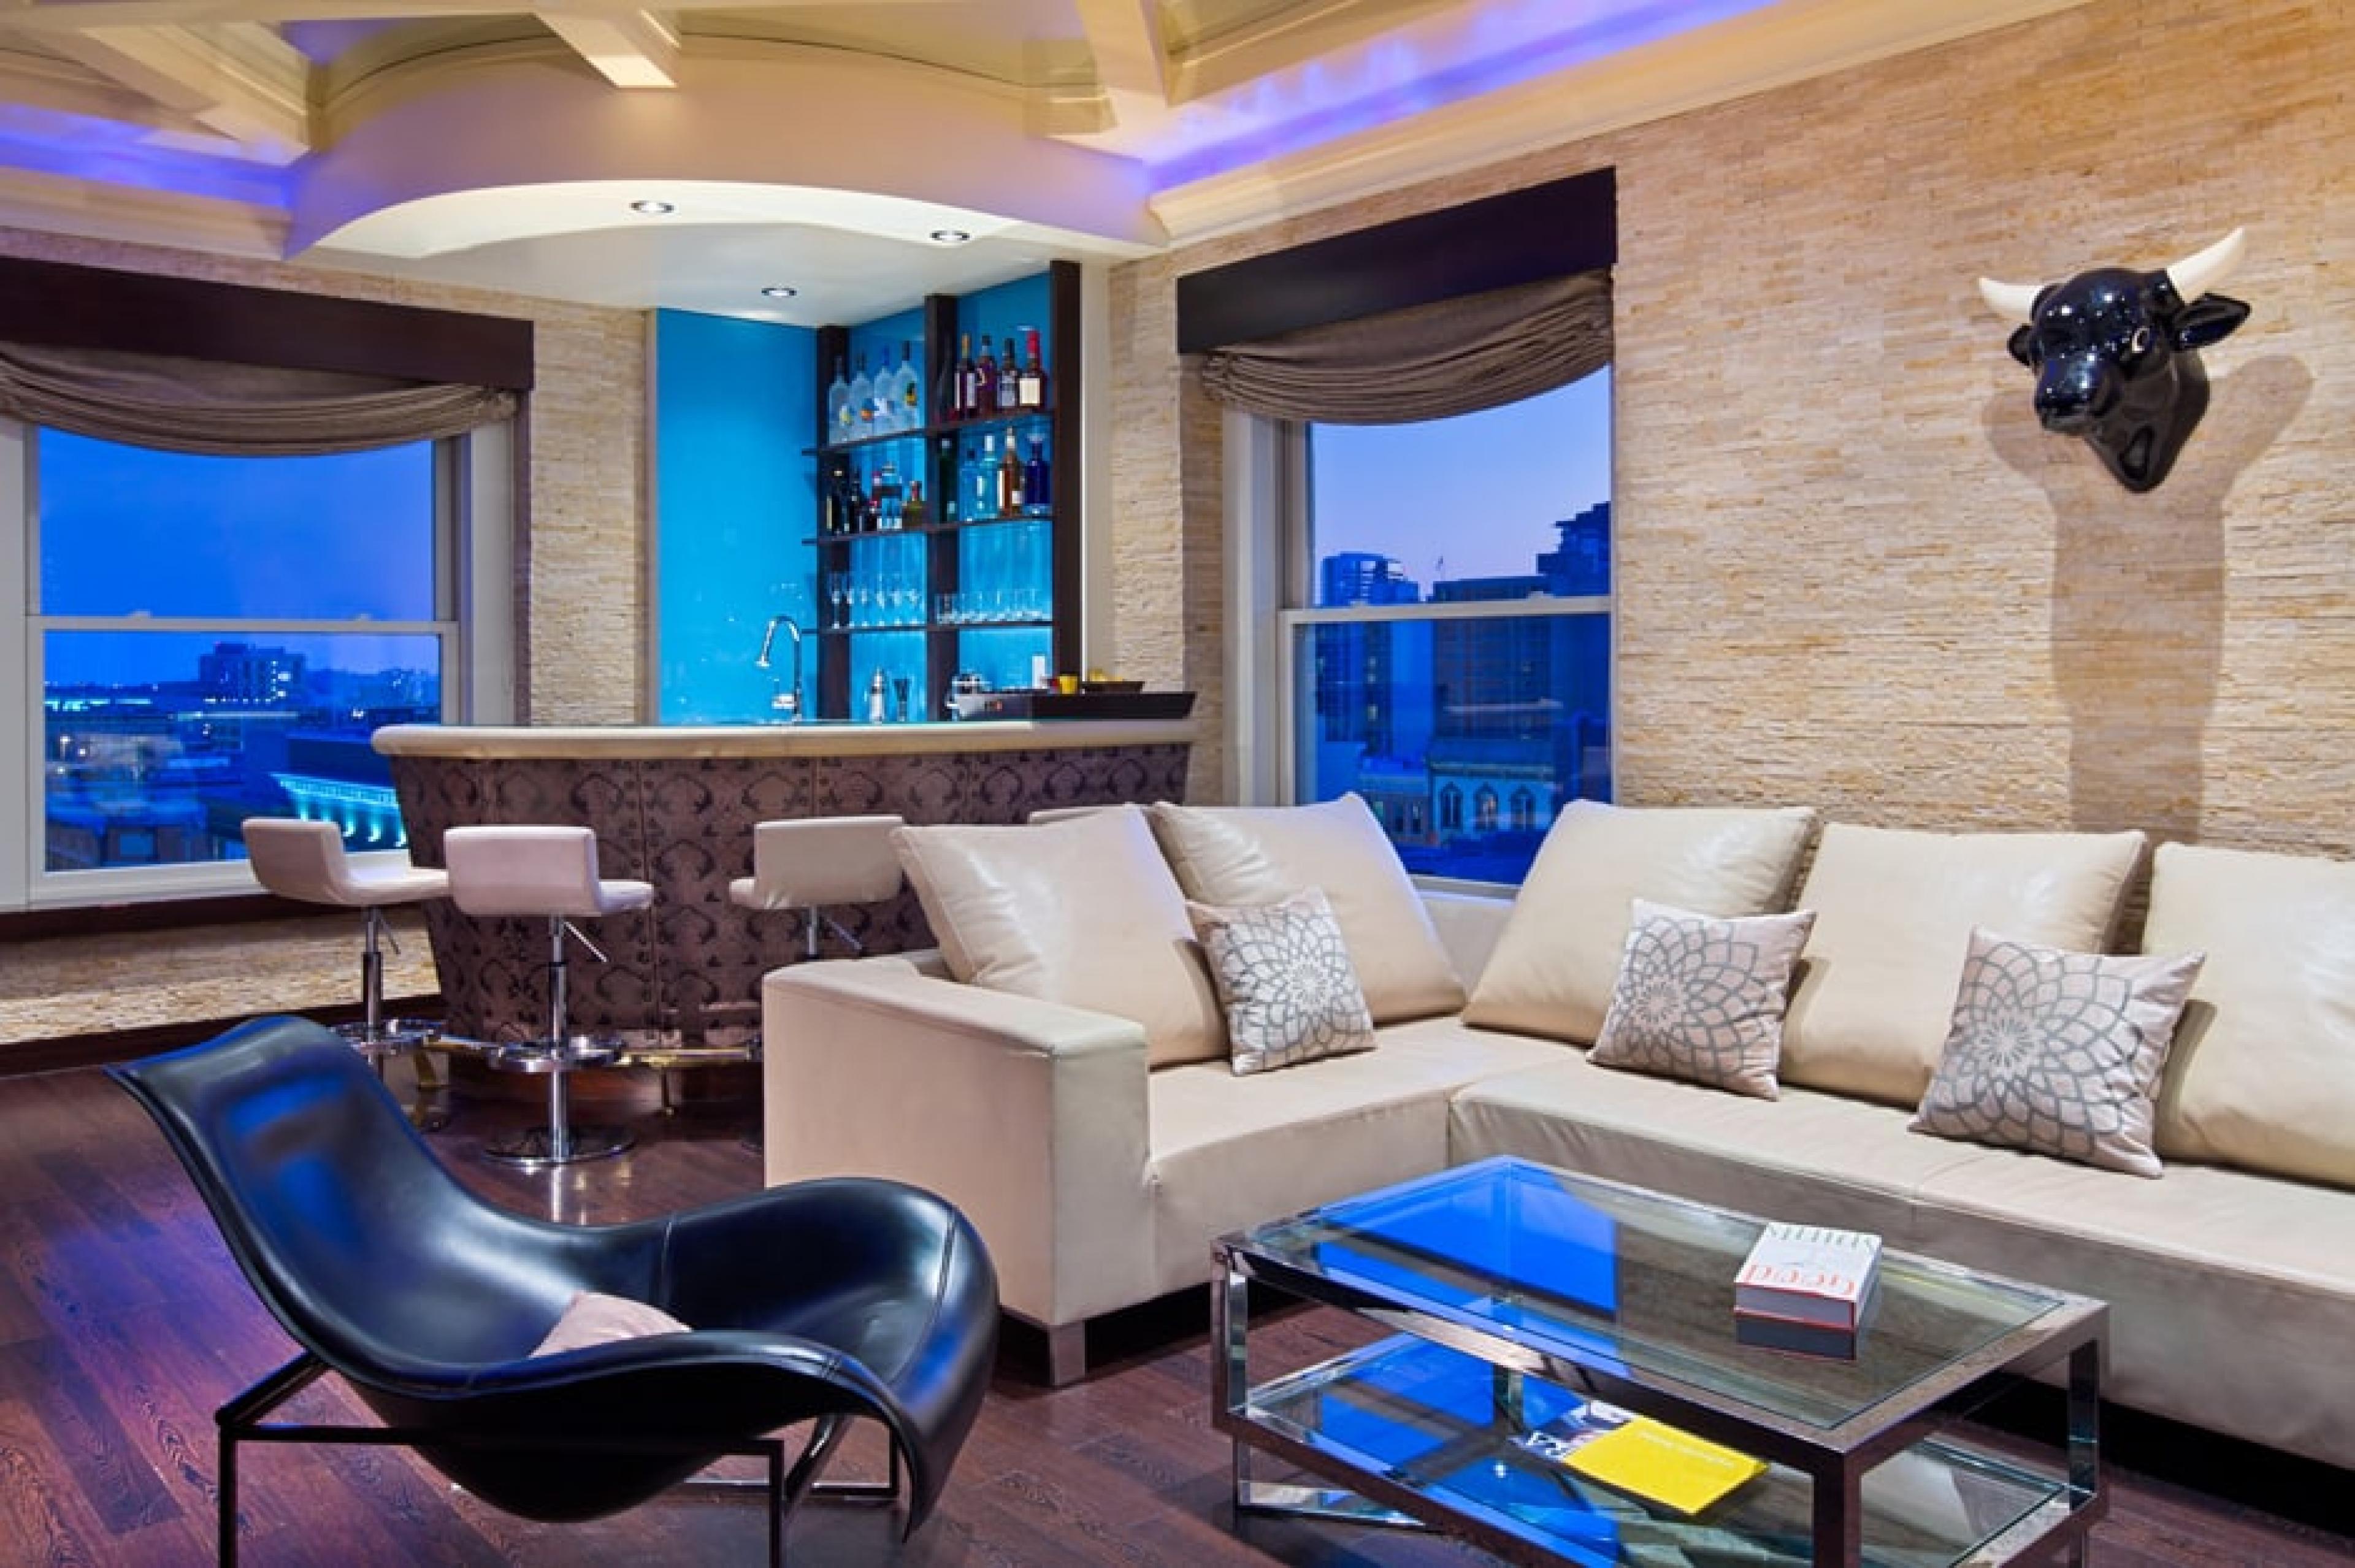 Lounge at Andaz San Diego, San Diego, California - Photo Courtesy Red Square, Inc.